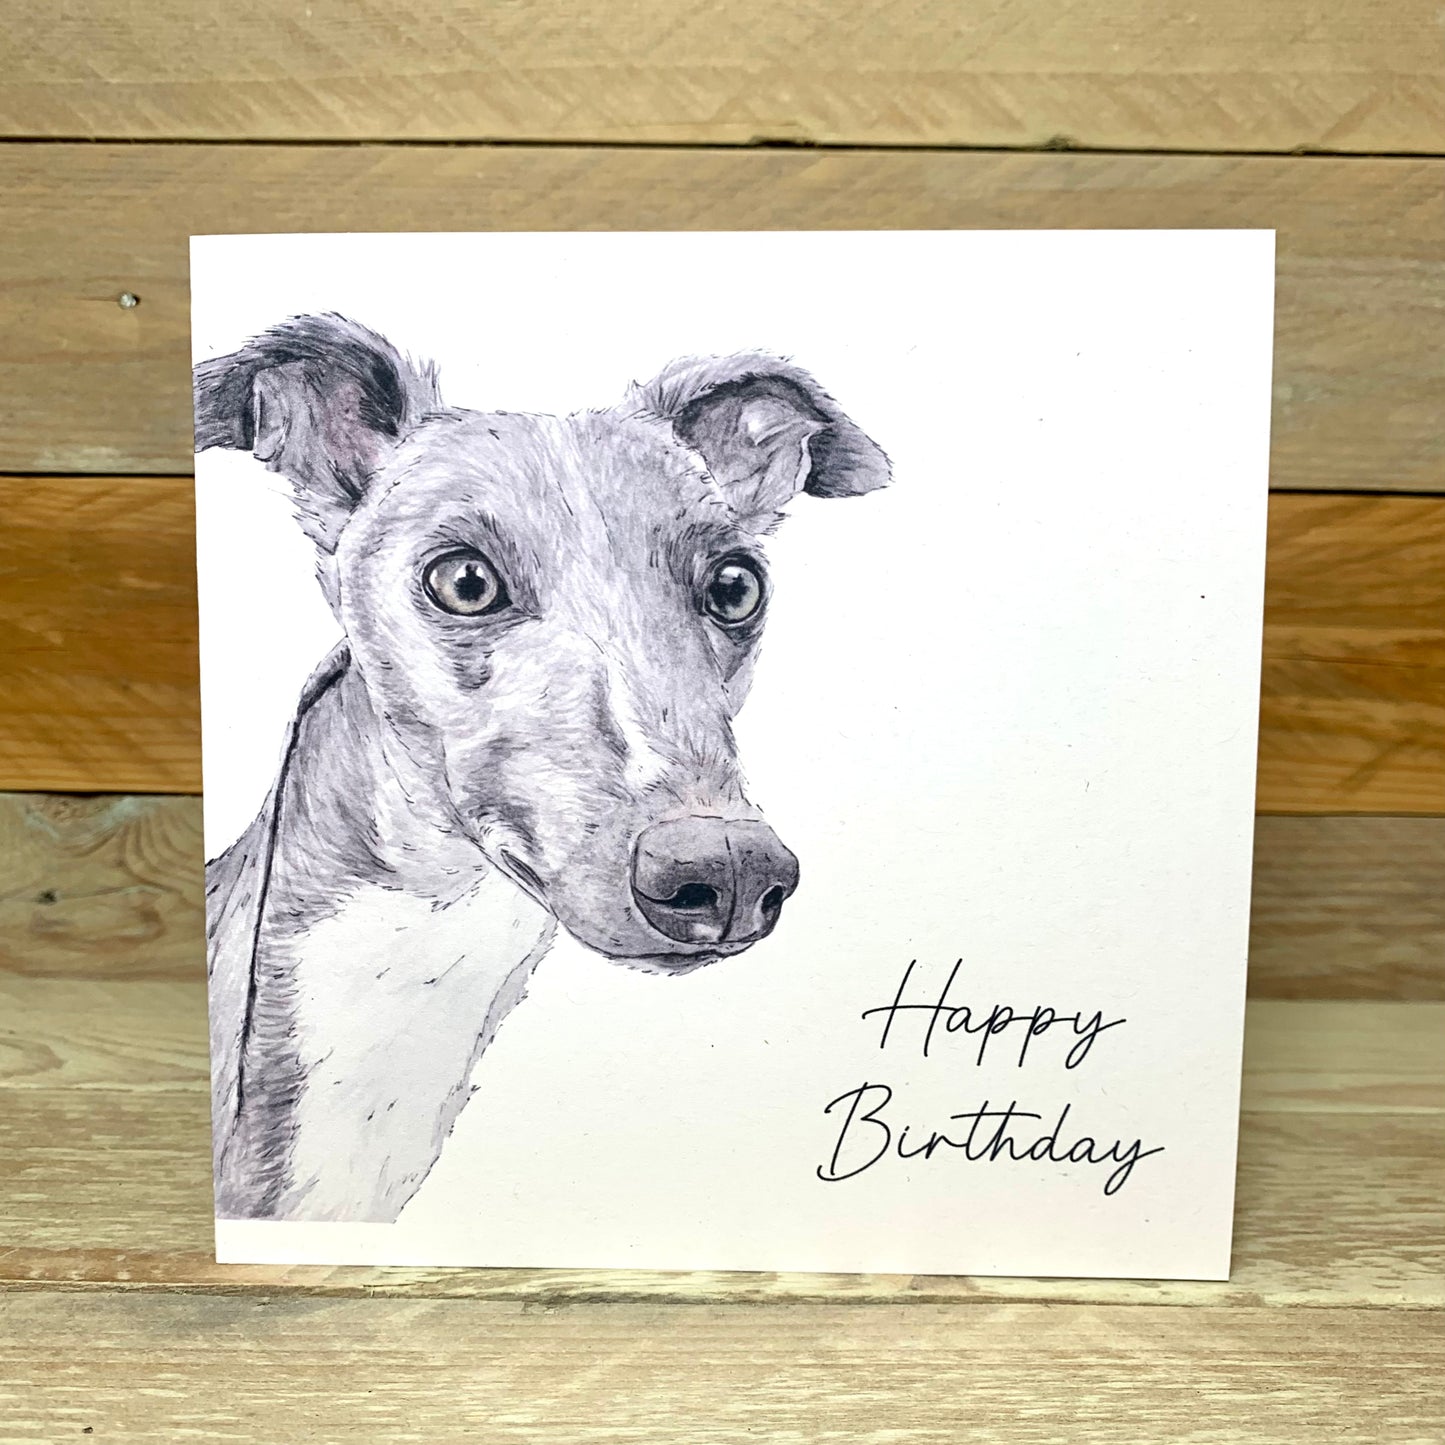 Long Noses Whippet Birthday Card